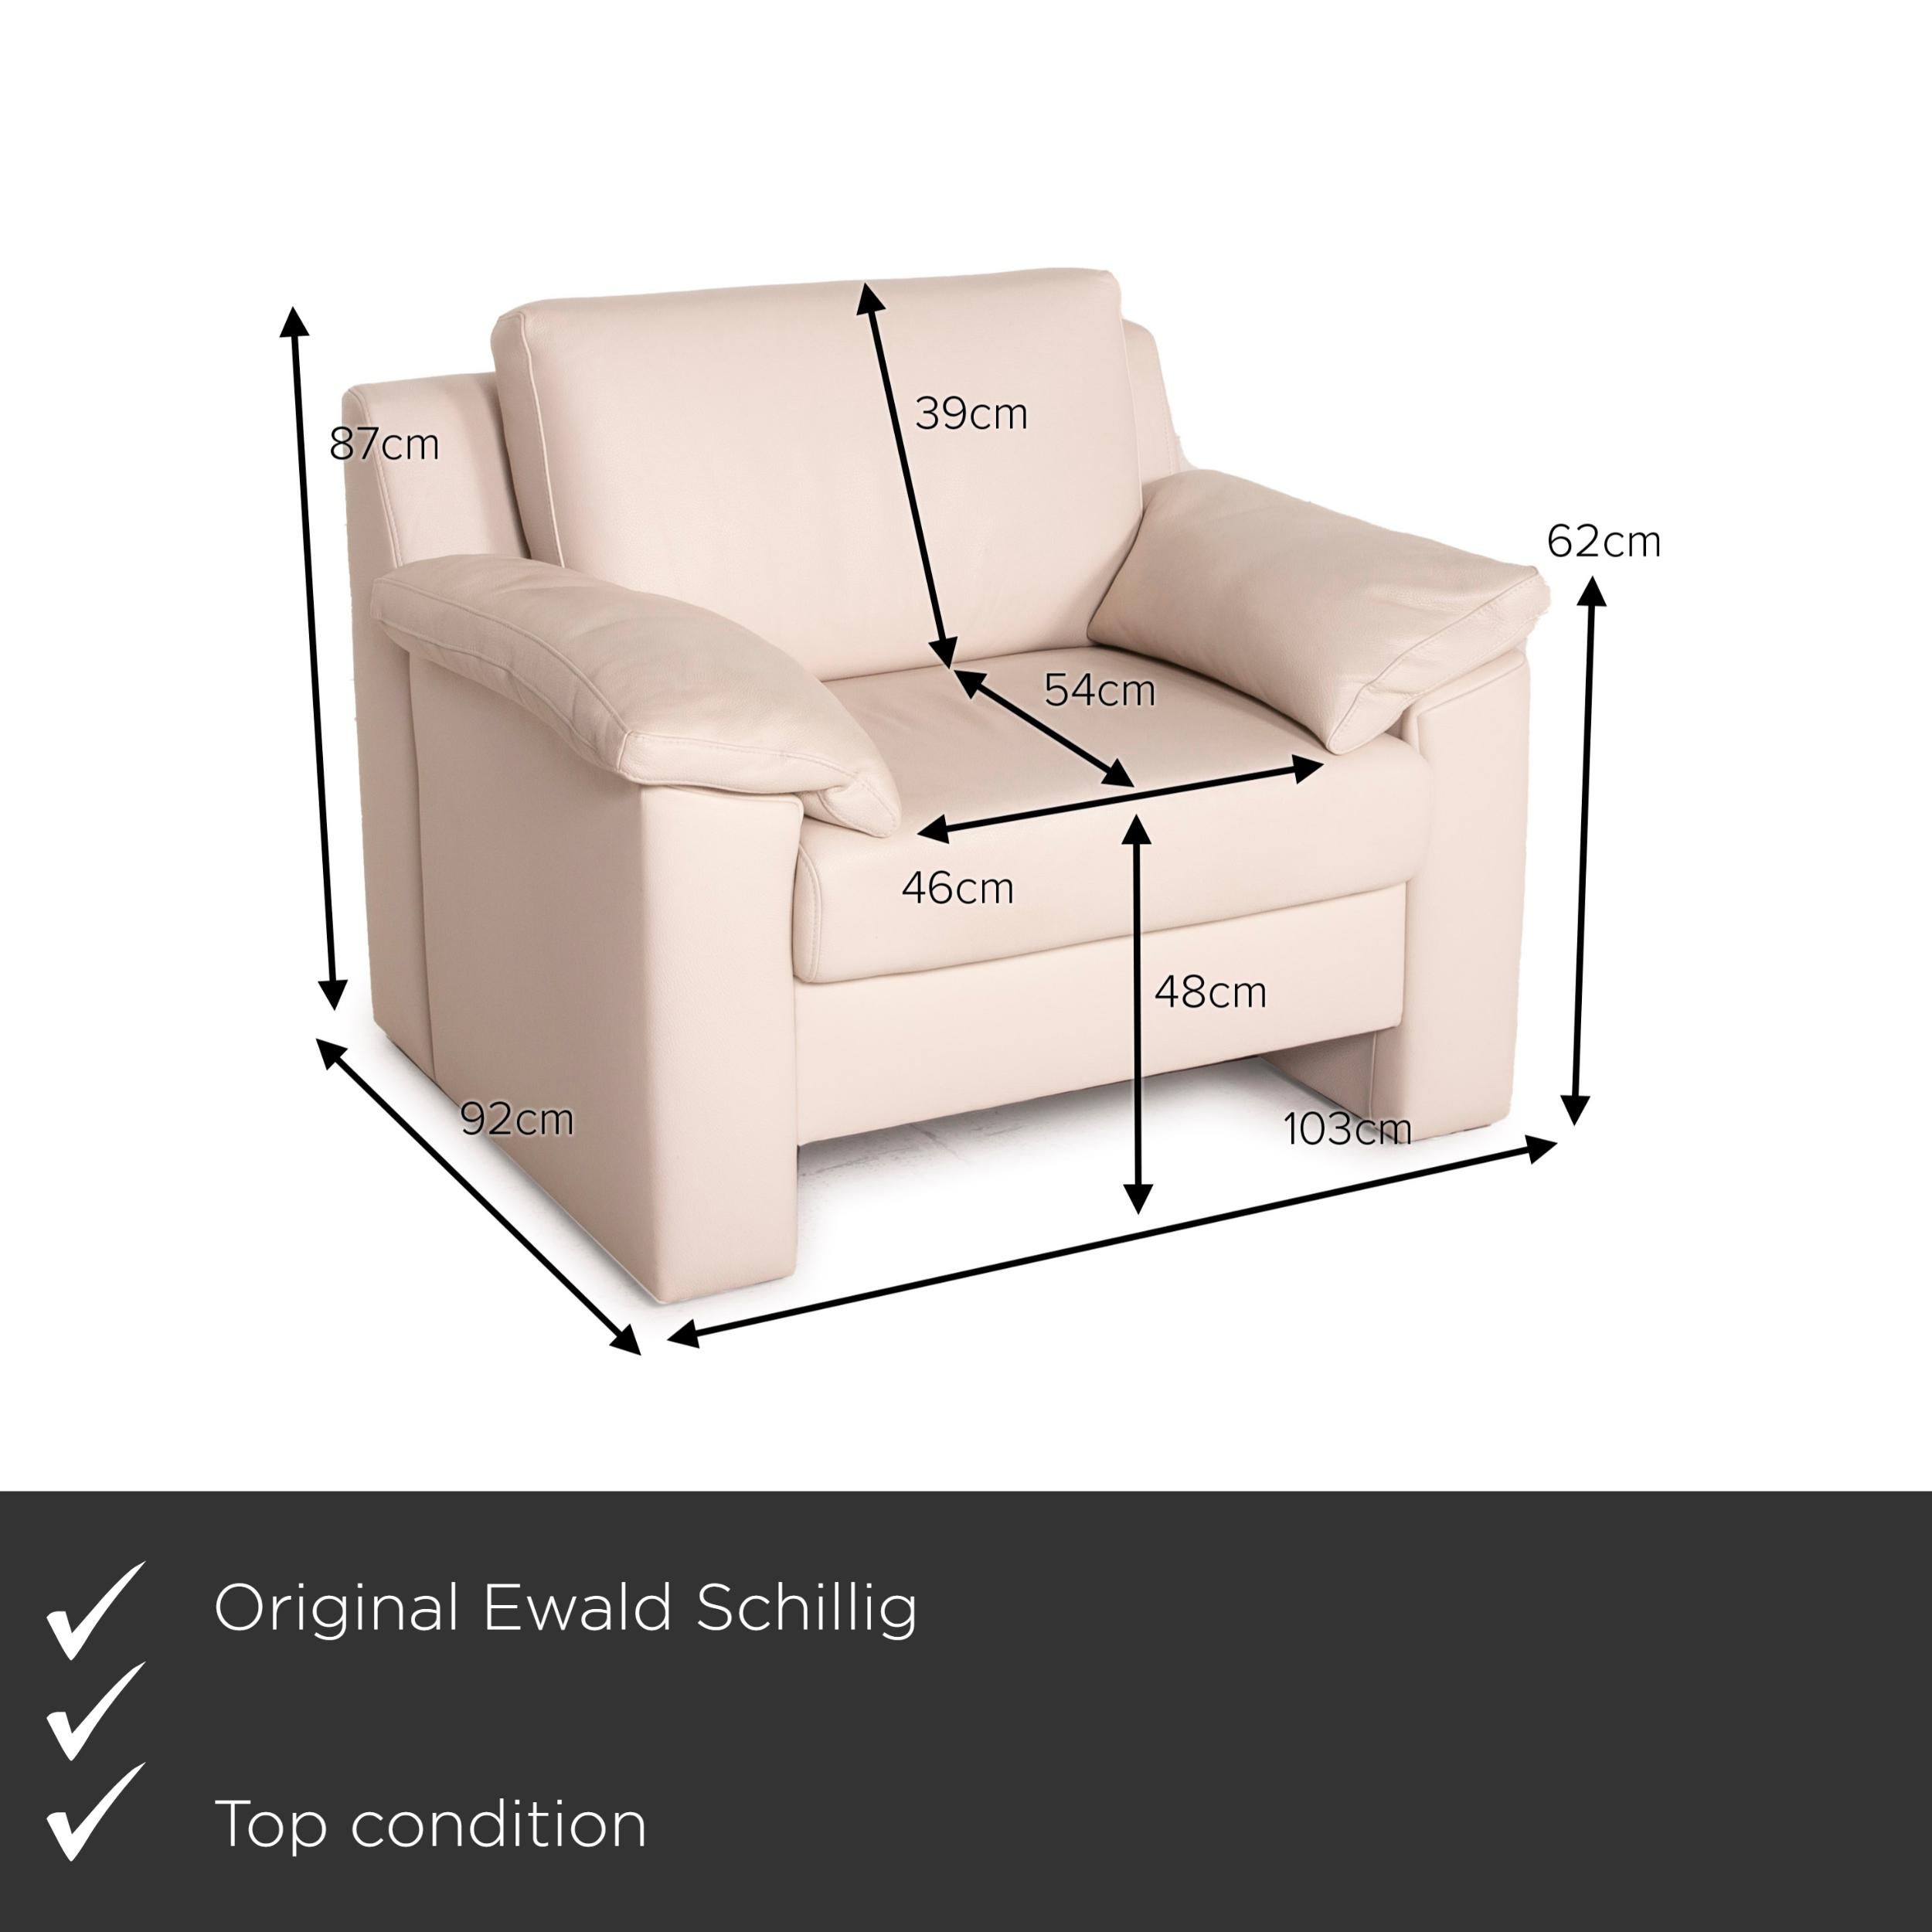 We present to you an Ewald Schillig Flex Plus leather armchair cream.
 
 

 Product measurements in centimeters:
 

Depth: 92
Width: 103
Height: 87
Seat height: 48
Rest height: 62
Seat depth: 54
Seat width: 46
Back height: 39.